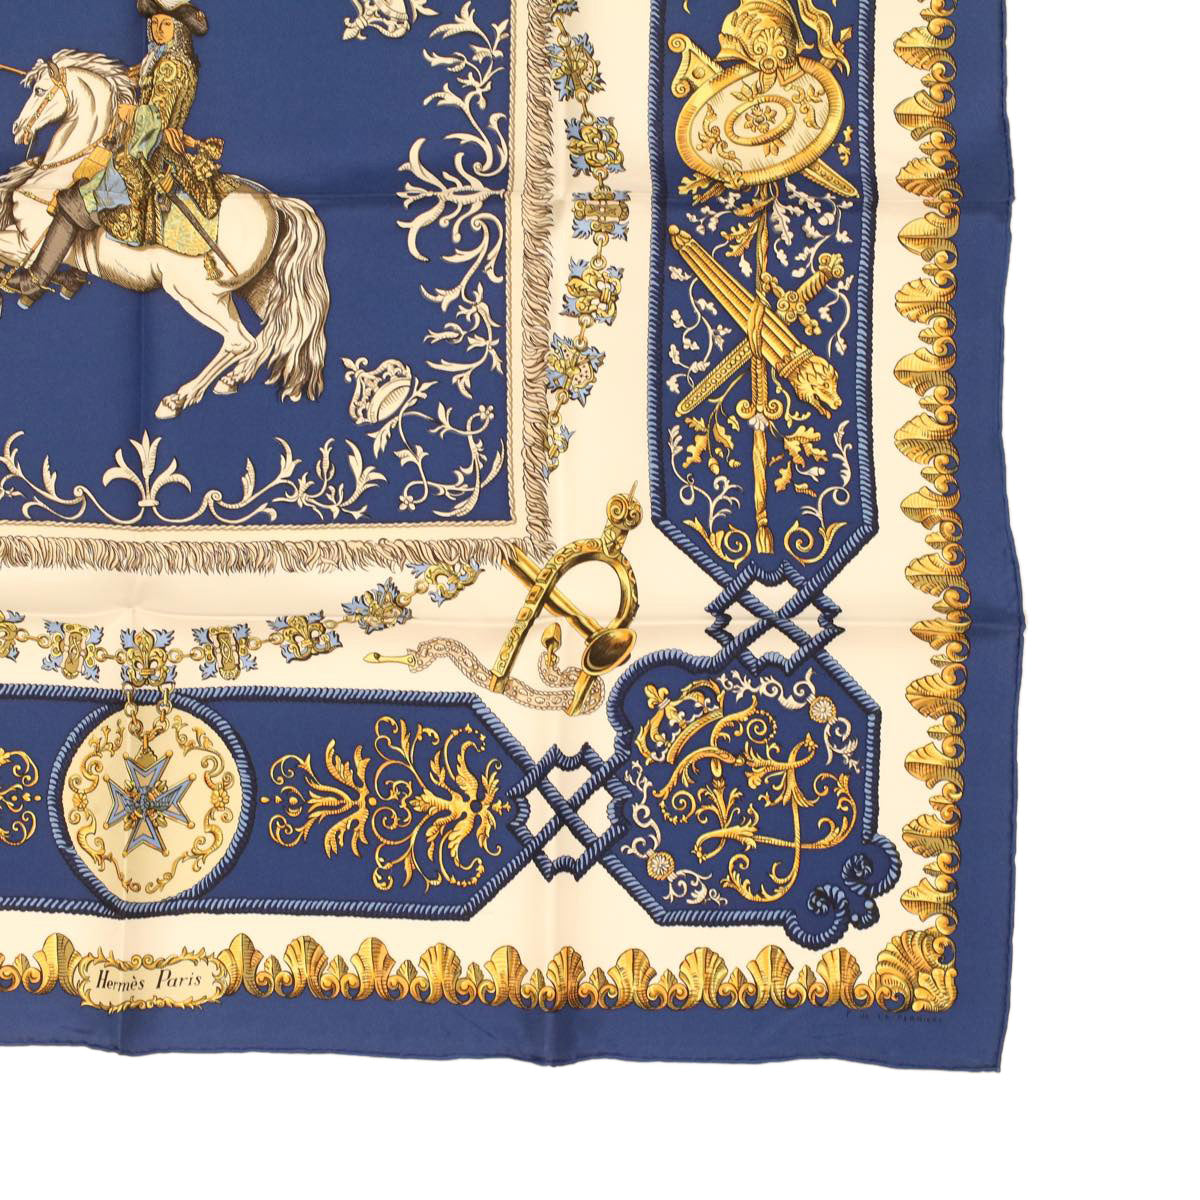 HERMES Carre 90 LVDOVICVS MAGNVS Scarf Silk Blue Yellow Auth 36788